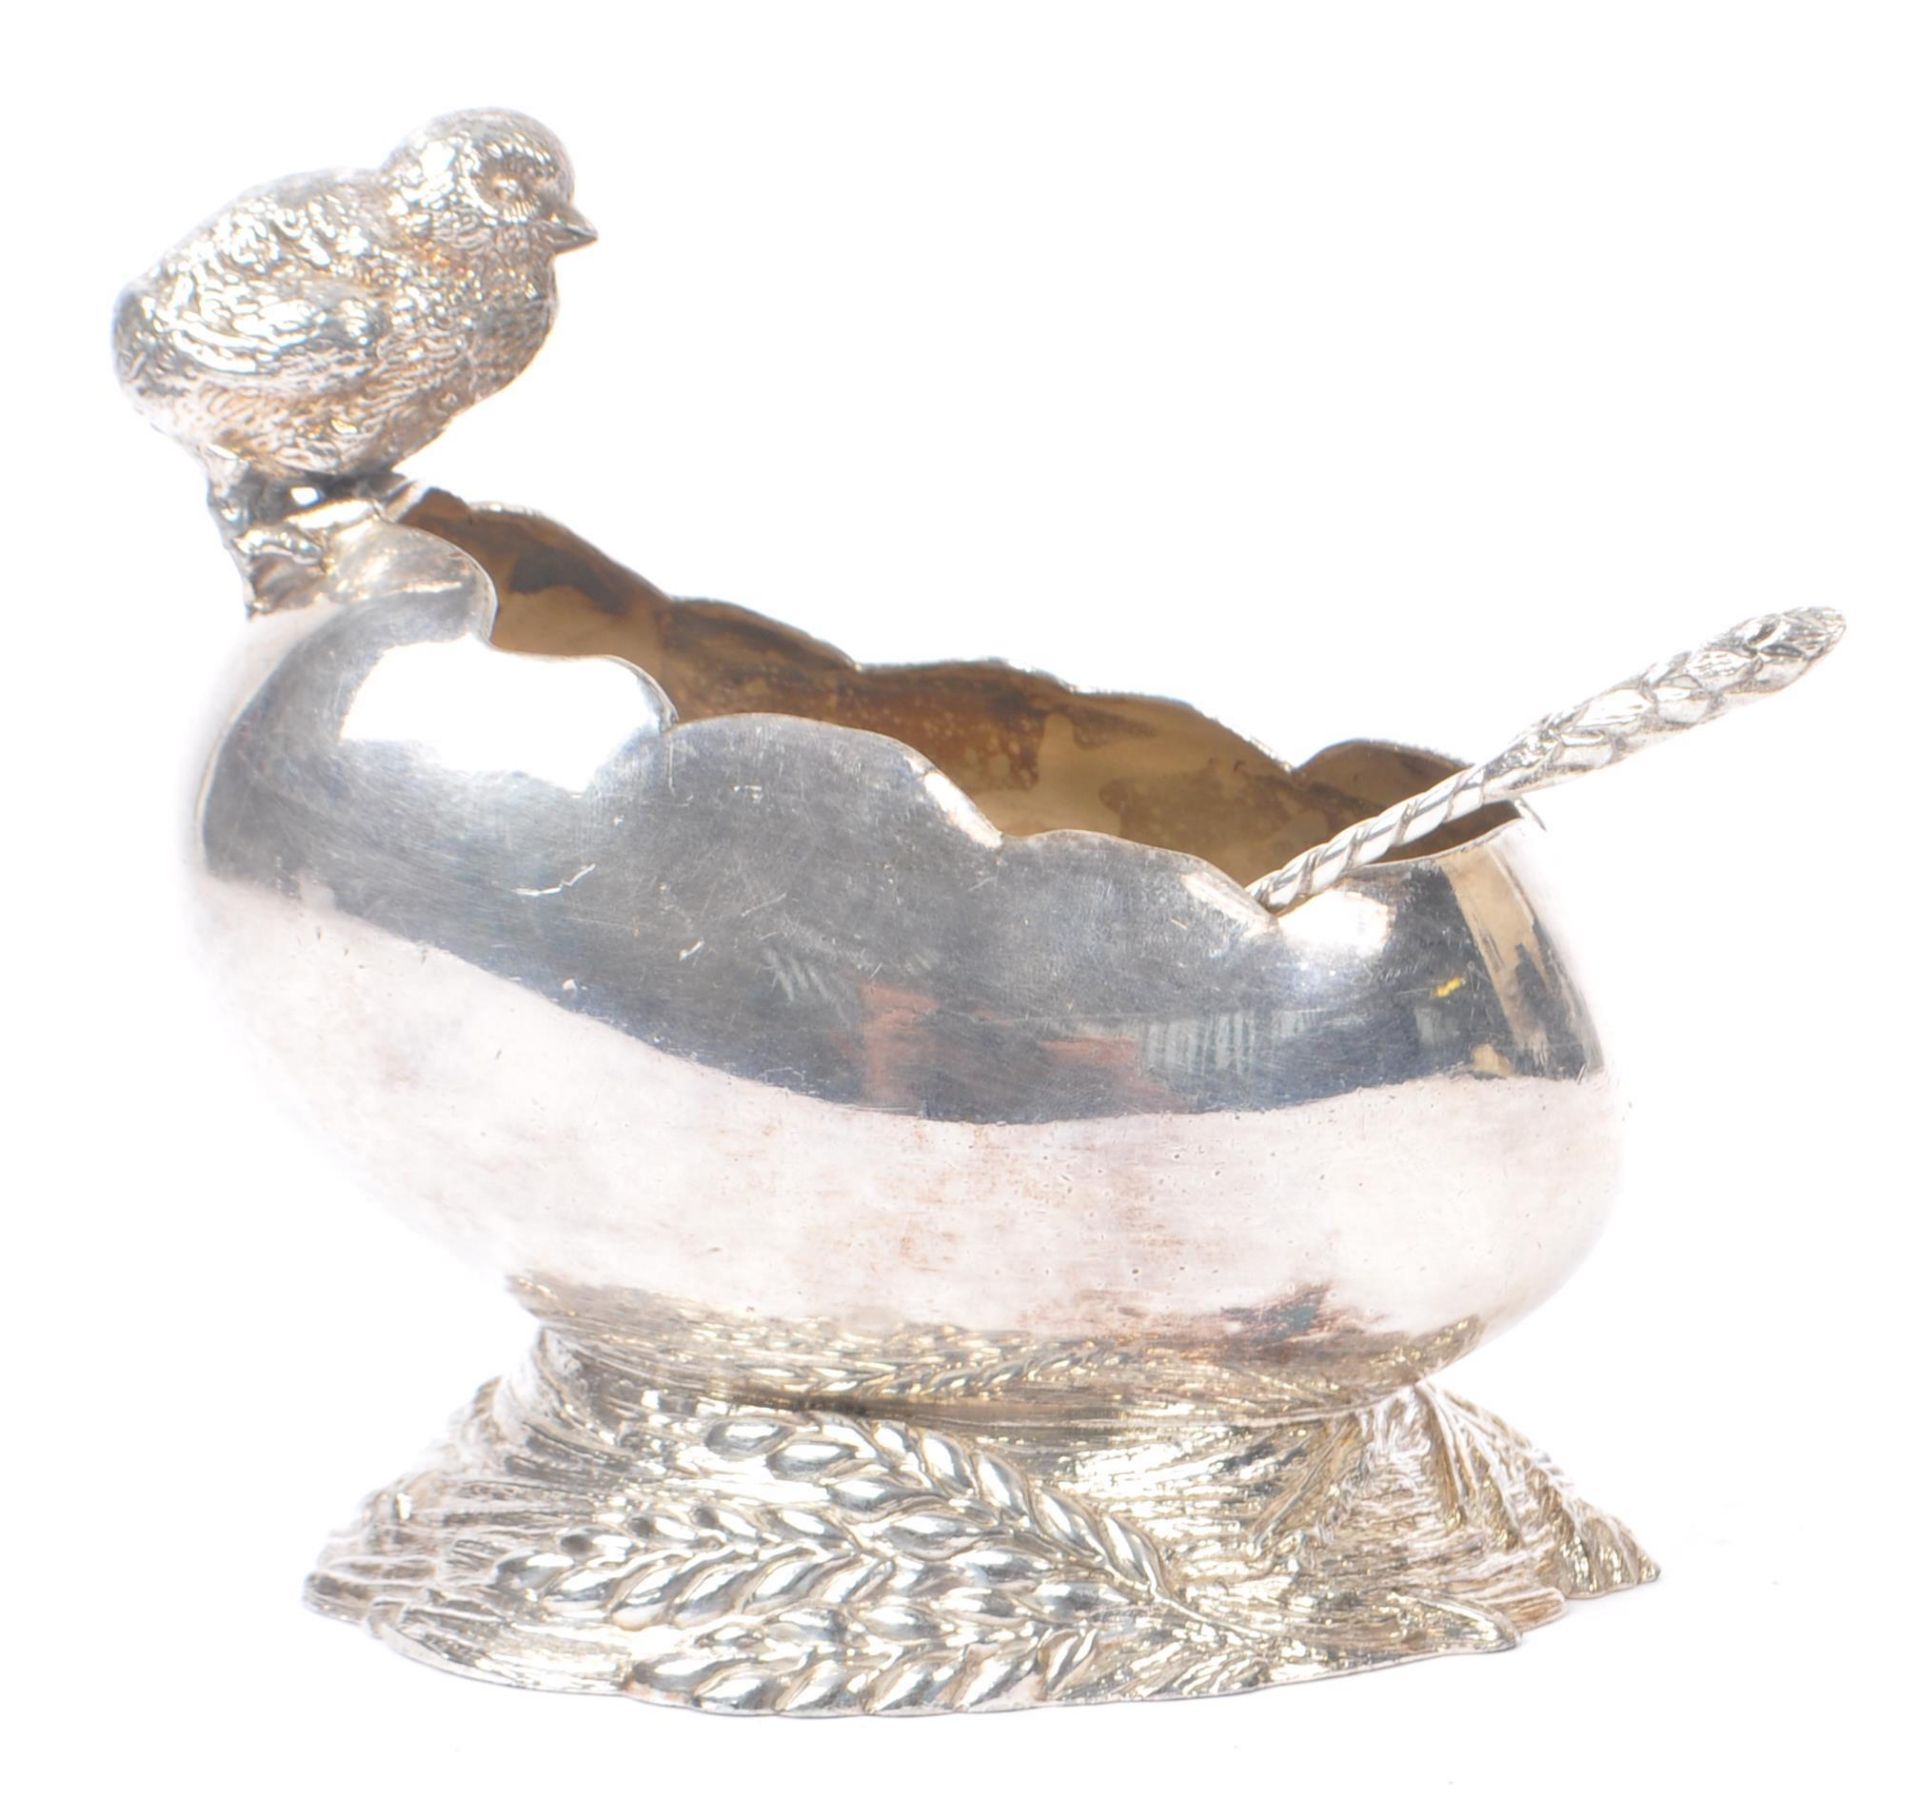 ART DECO SILVER PLATE CHICK AND EGG SALT CELLAR